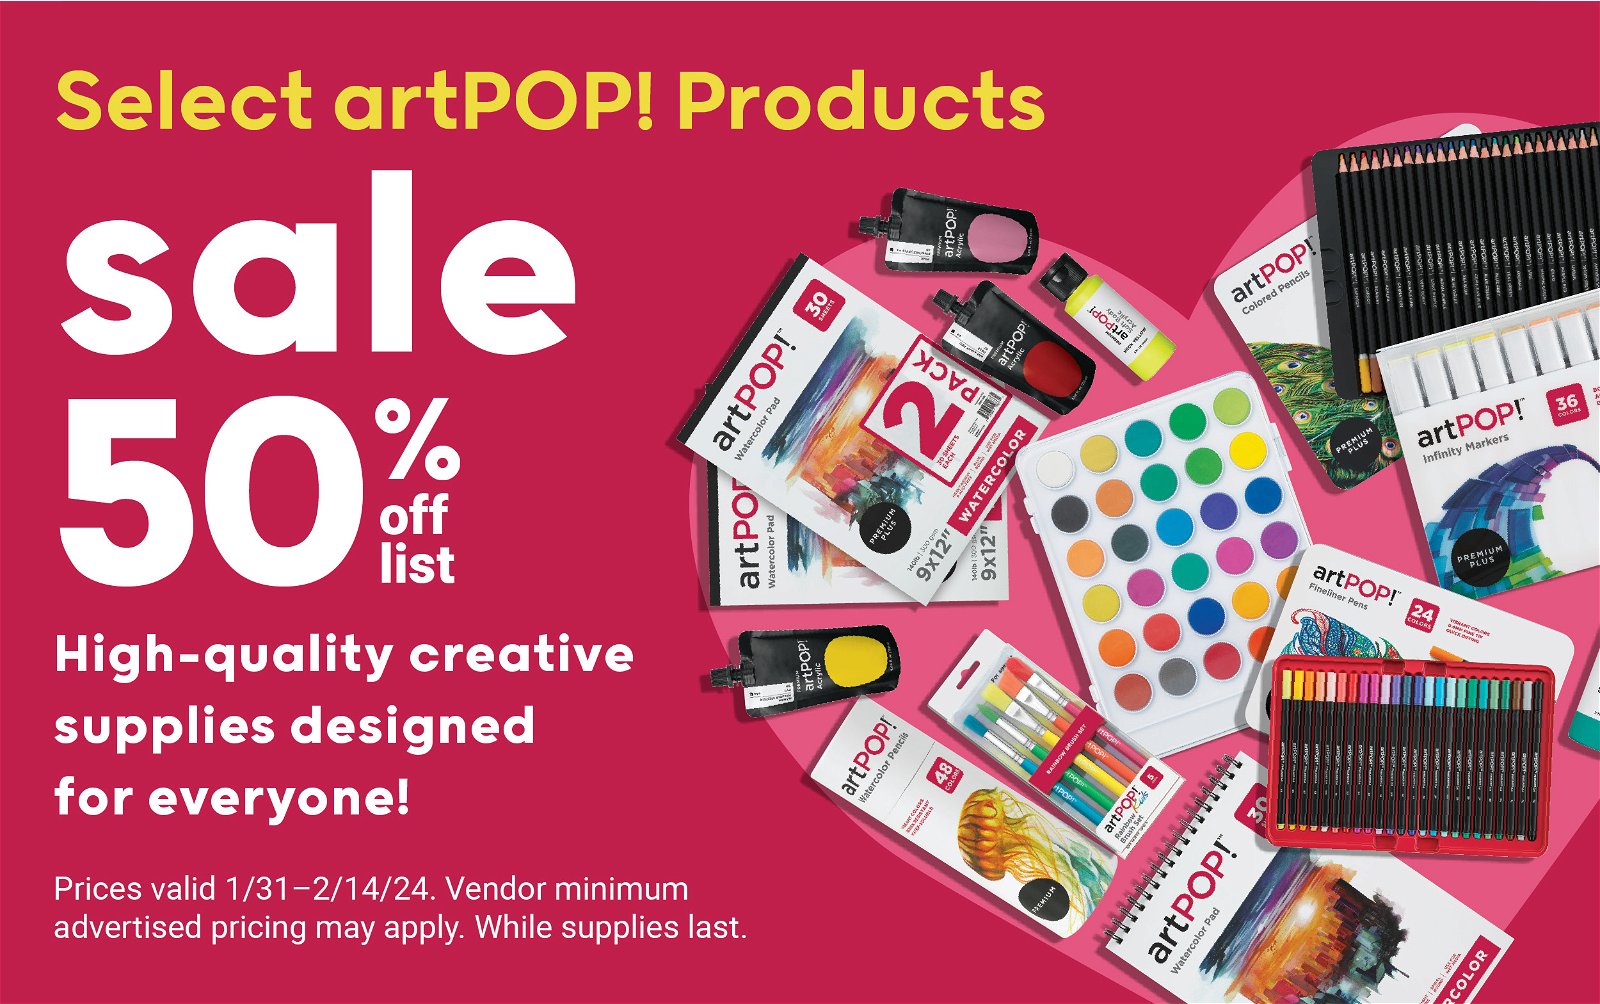 Select artPOP! Products Sale 50% off list